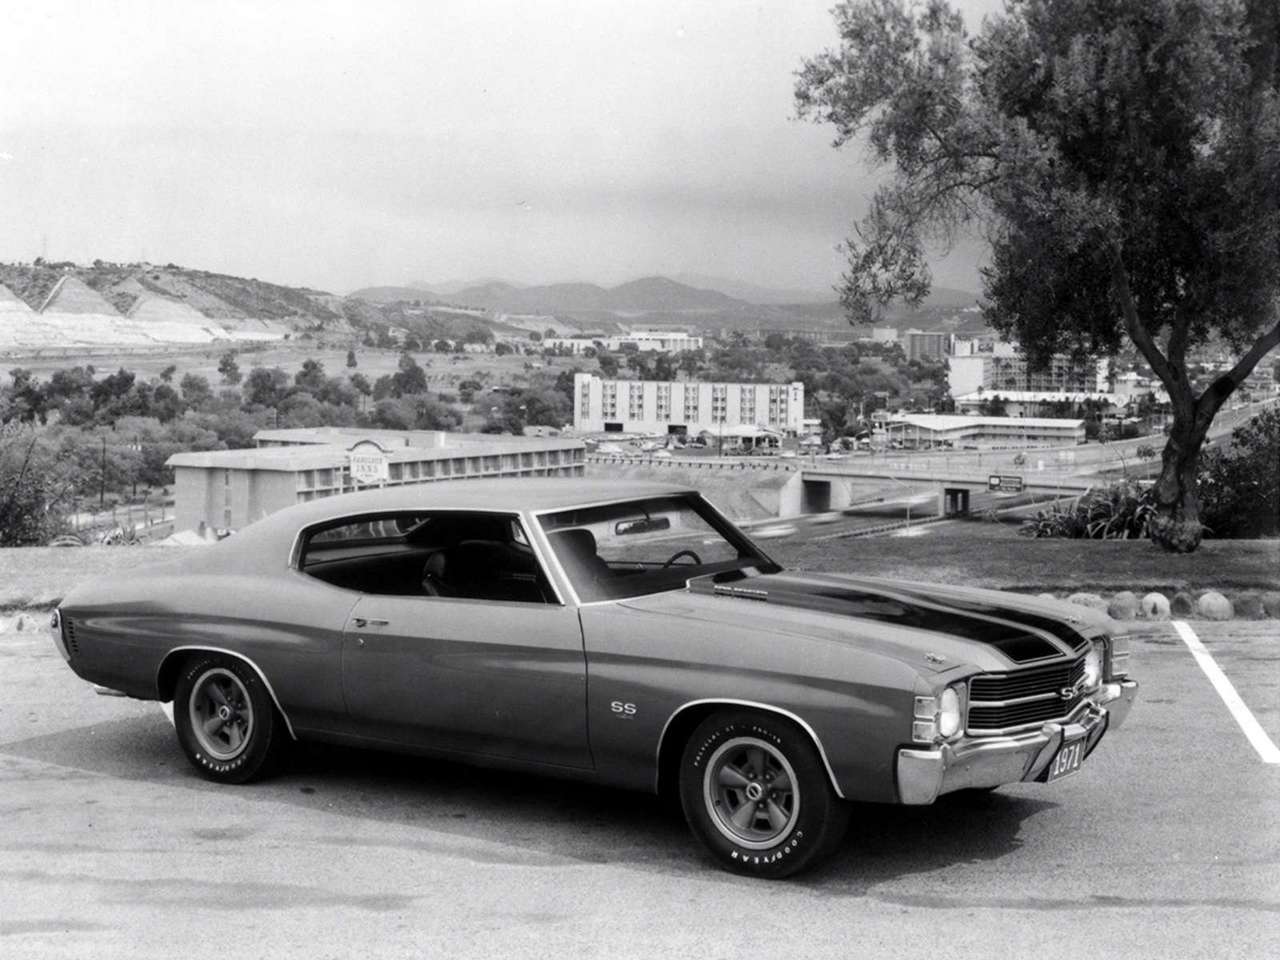 1969 Chevrolet Chevelle Ss 396 Wallpaper Wallpapers Backgrounds 1280x960